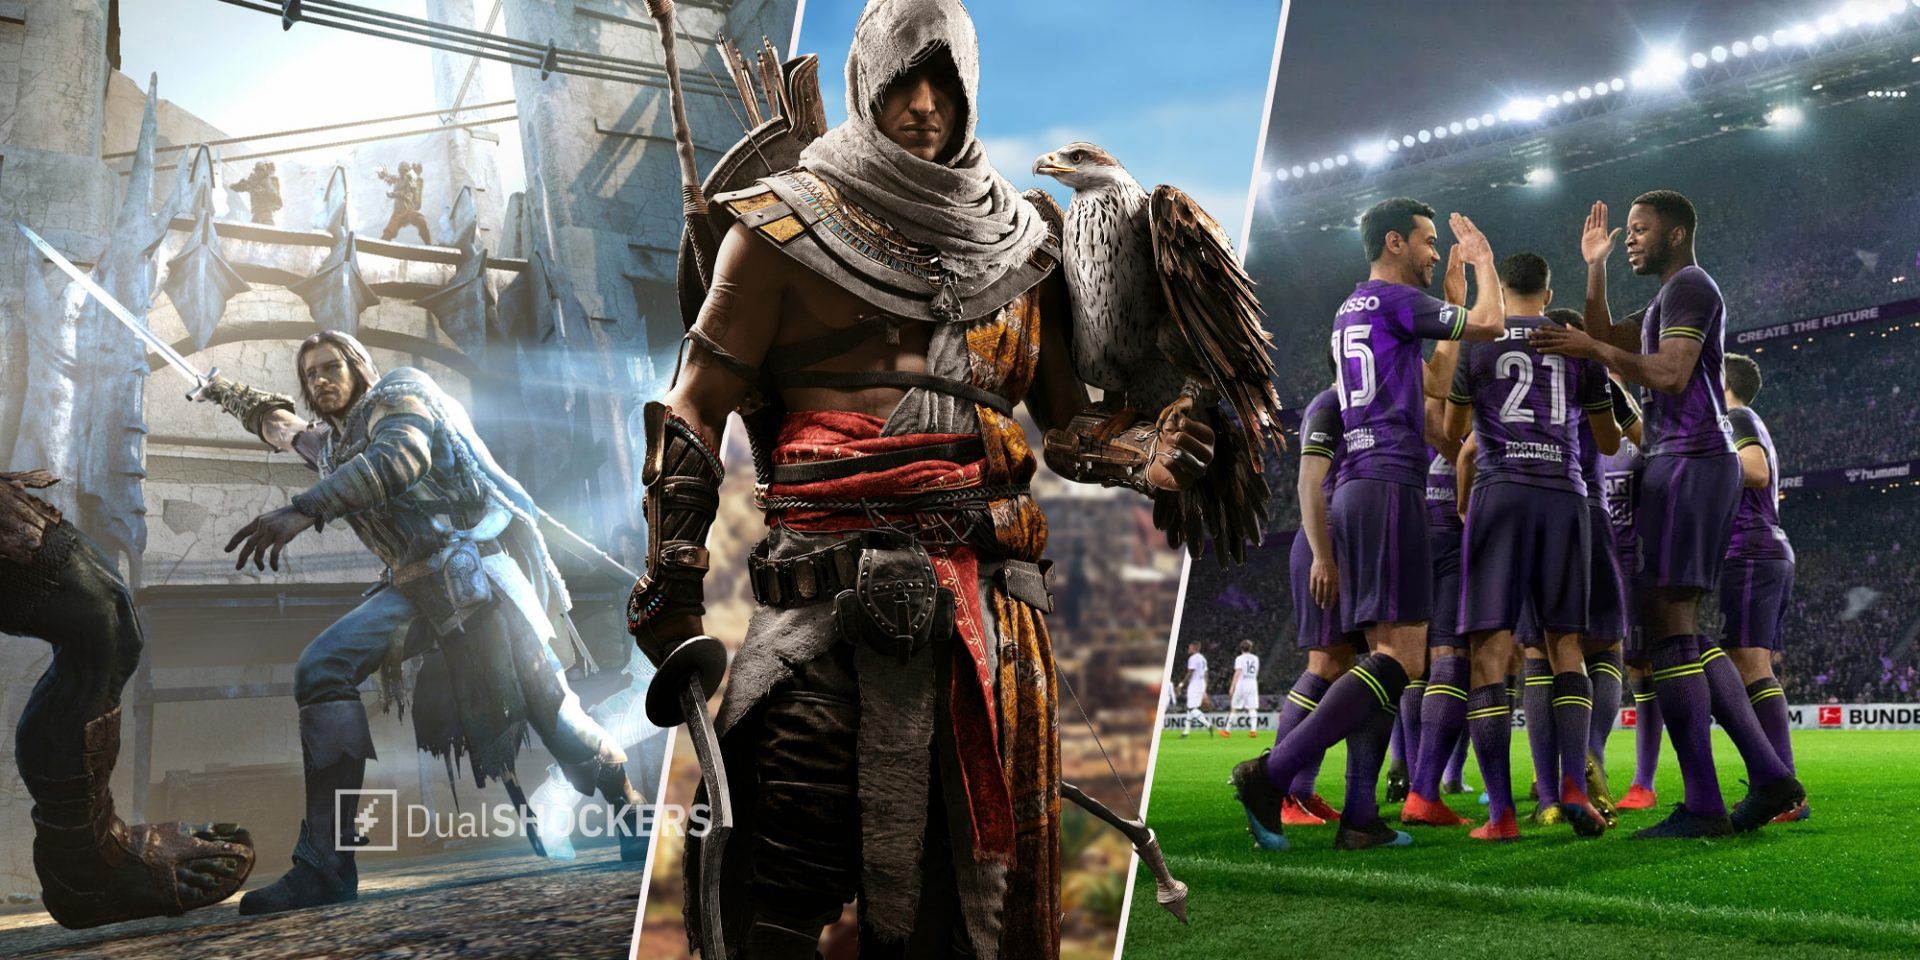 Middle-earth: Shadow of Mordor on left, Assassin's Creed Origins in middle, Football Manager 2022 on right